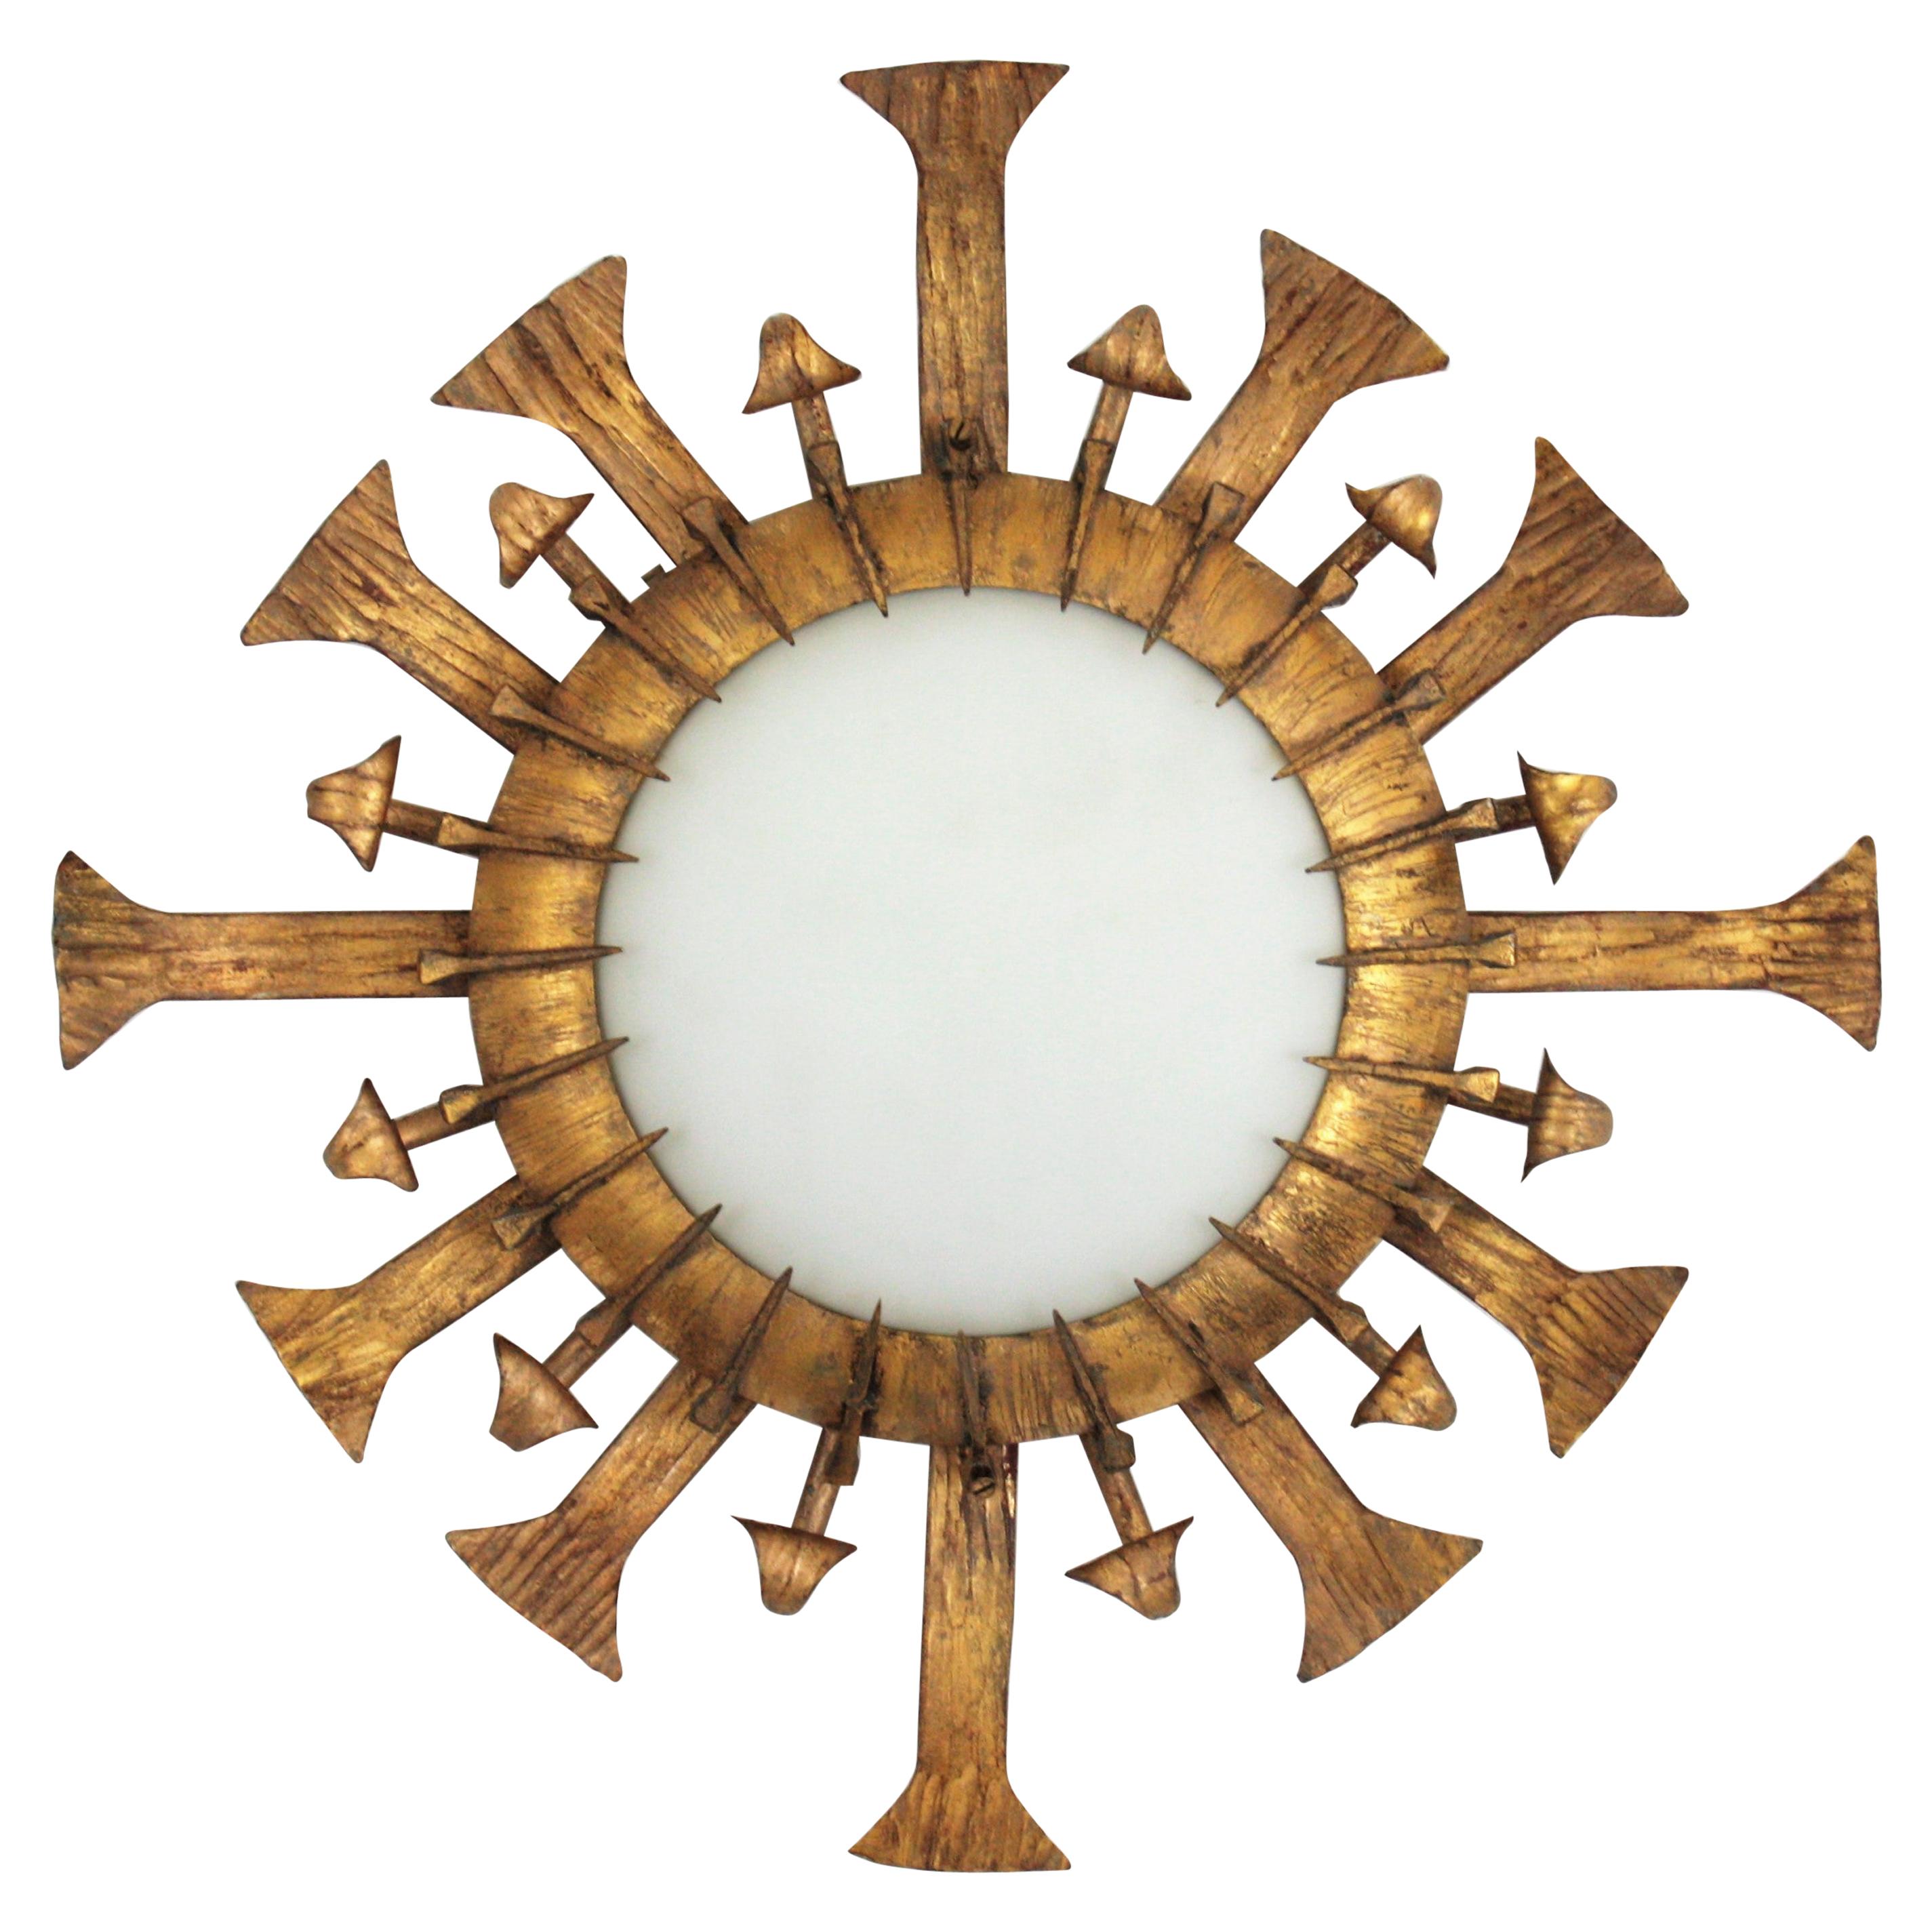 Rare Brutalist sunburst light fixture in gilt wrought iron with milk glass shade. France, 1940s-1950s
This hand forged iron sunburst flush mount or wall sconce has an eye-catching design with alternating rays and scrolled details. The central milk